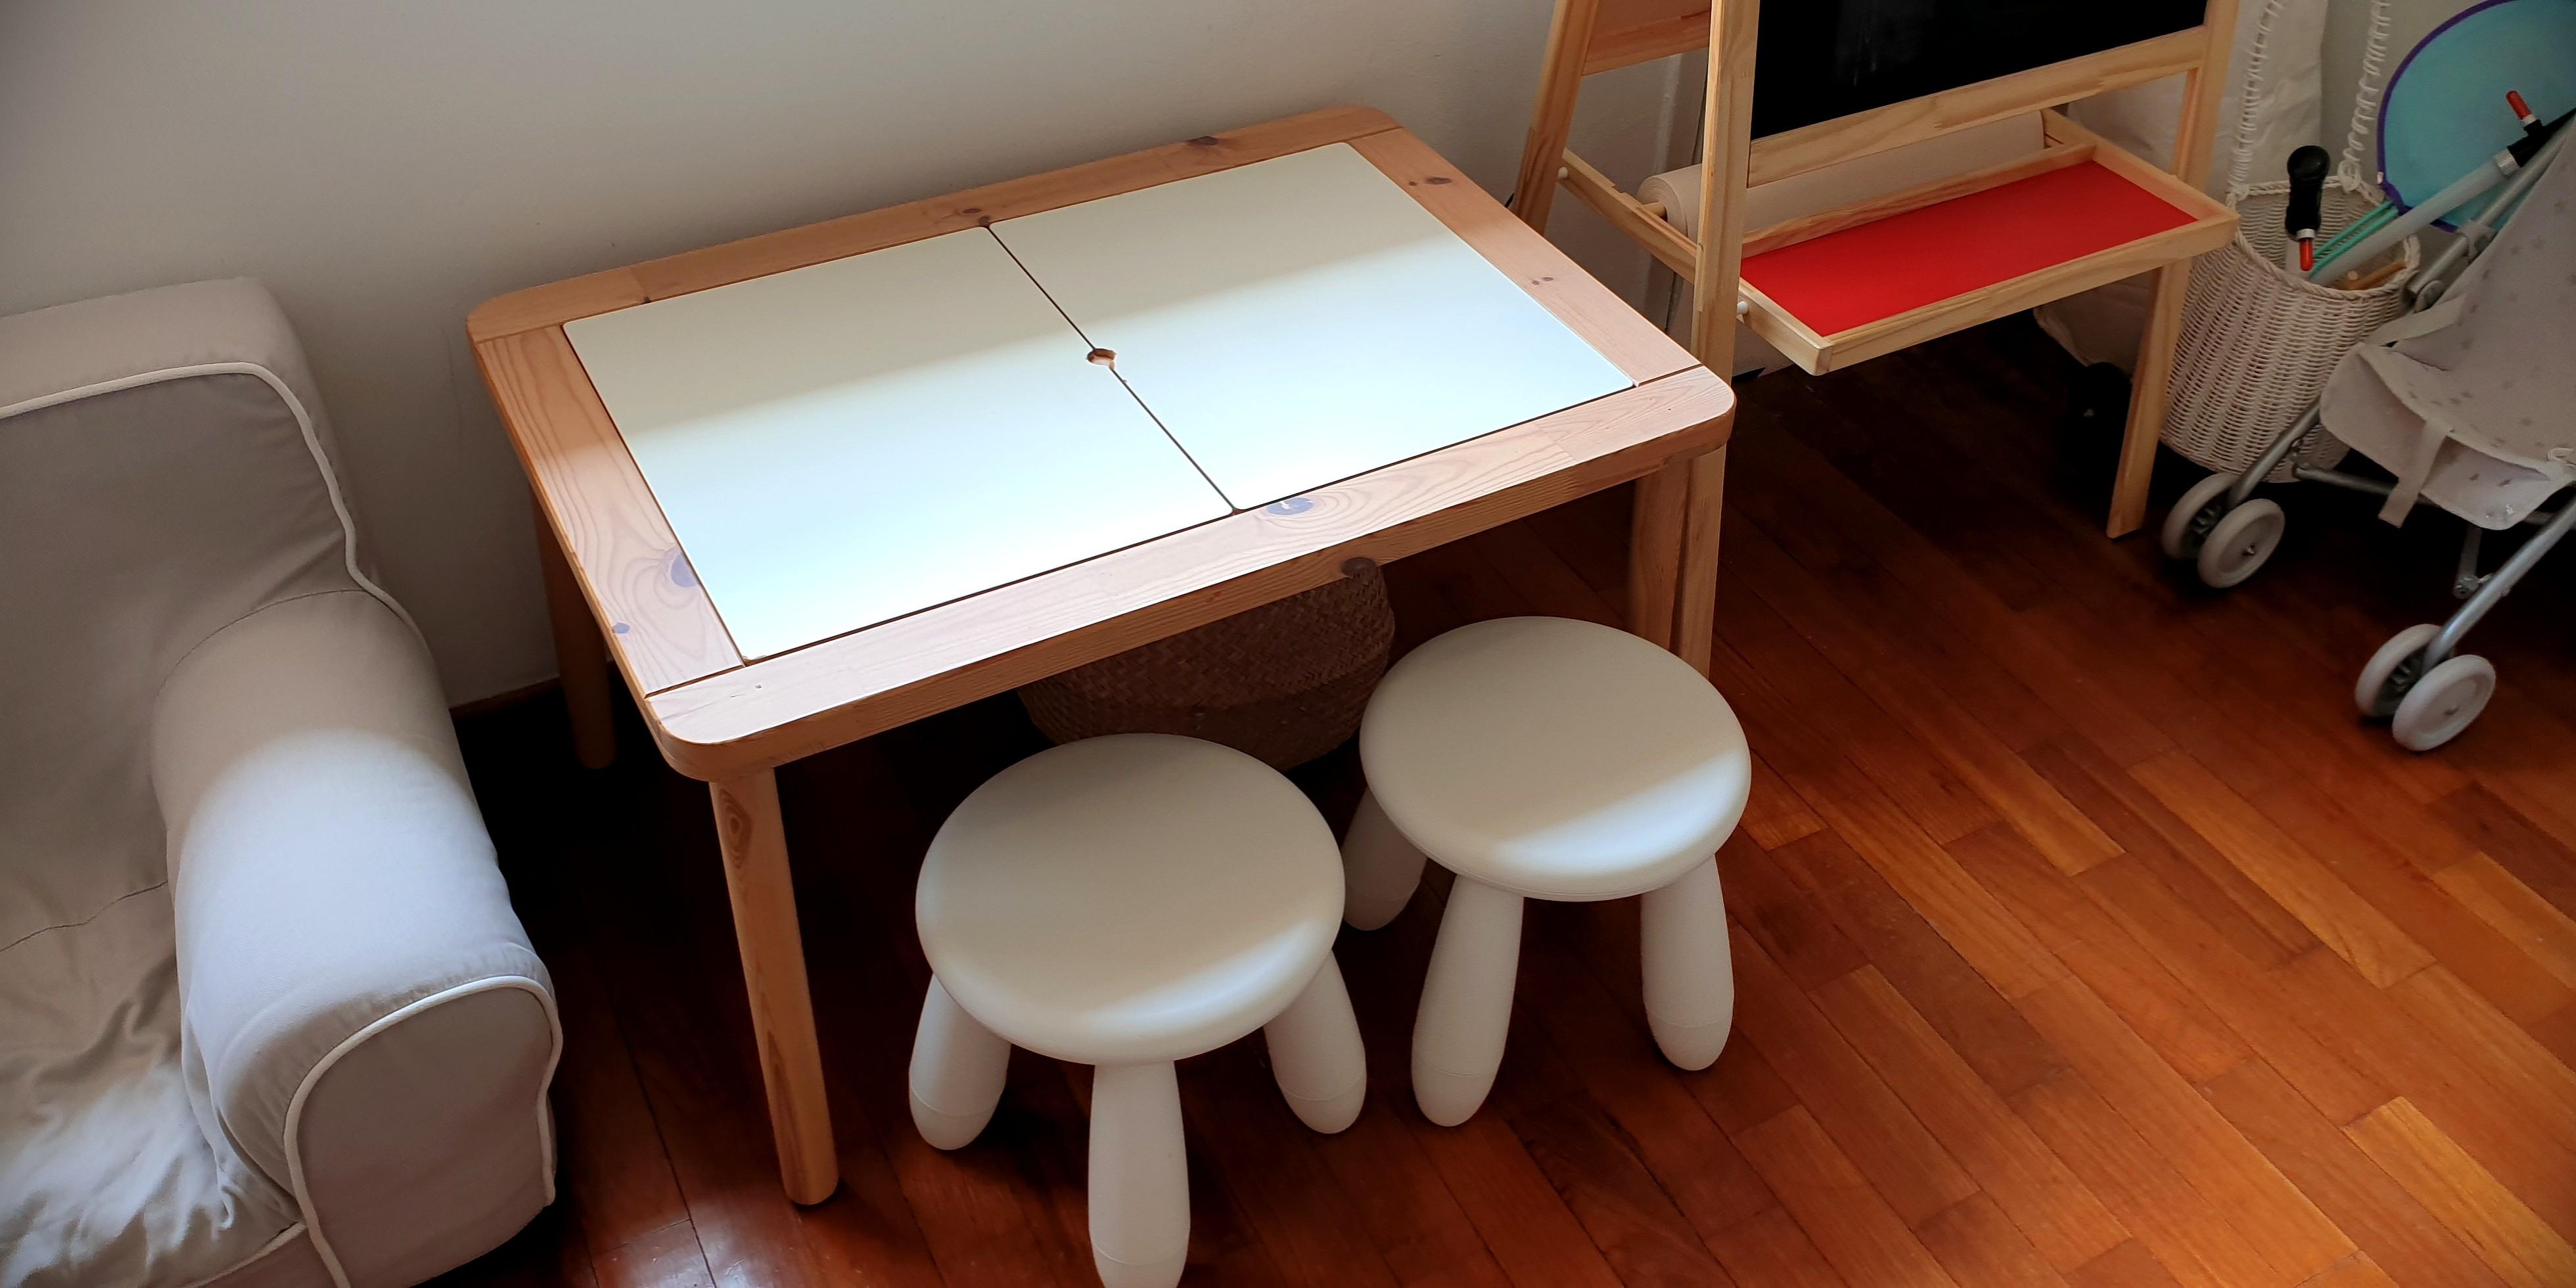 childrens tables for sale